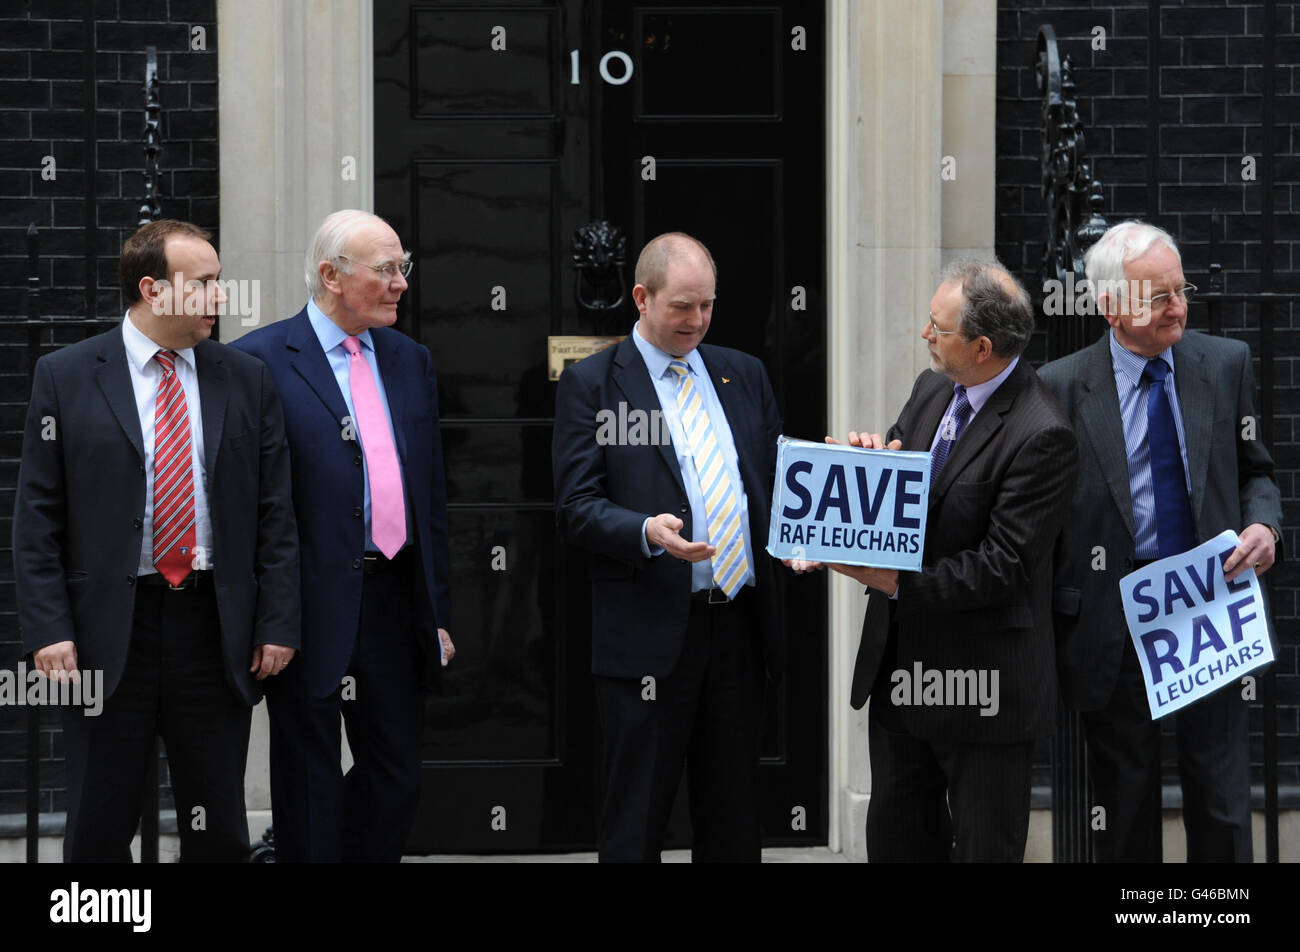 Menzies Campbell and representatives of the Save RAF Leuchars campaign Residents Action Force Leuchars present a petition to Number 10 Downing Street which opposes any threat to the future of RAF Leuchars. Stock Photo